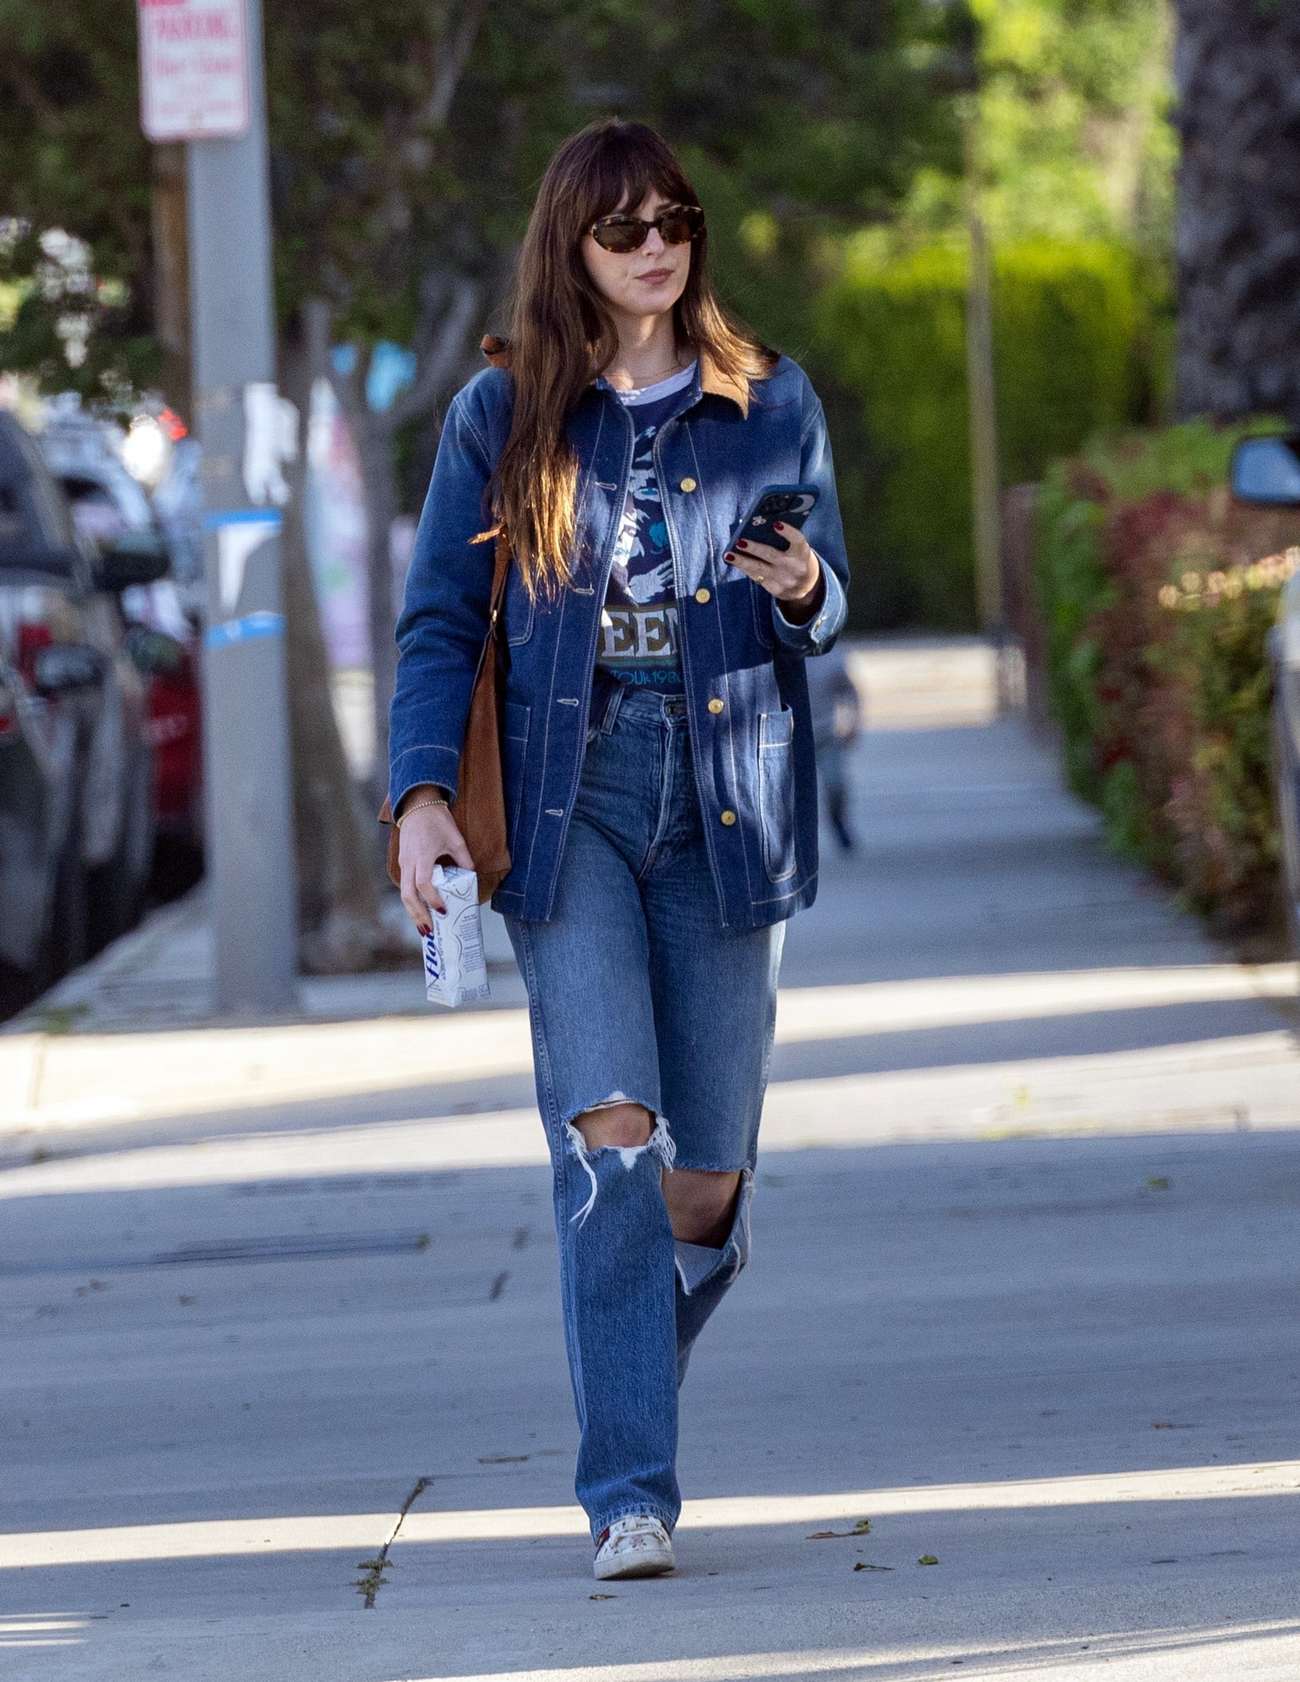 Dakota_Johnson_-_is_seen_out_and_about_running_errands_in_Los_Angeles2C_California__0513202301.jpg